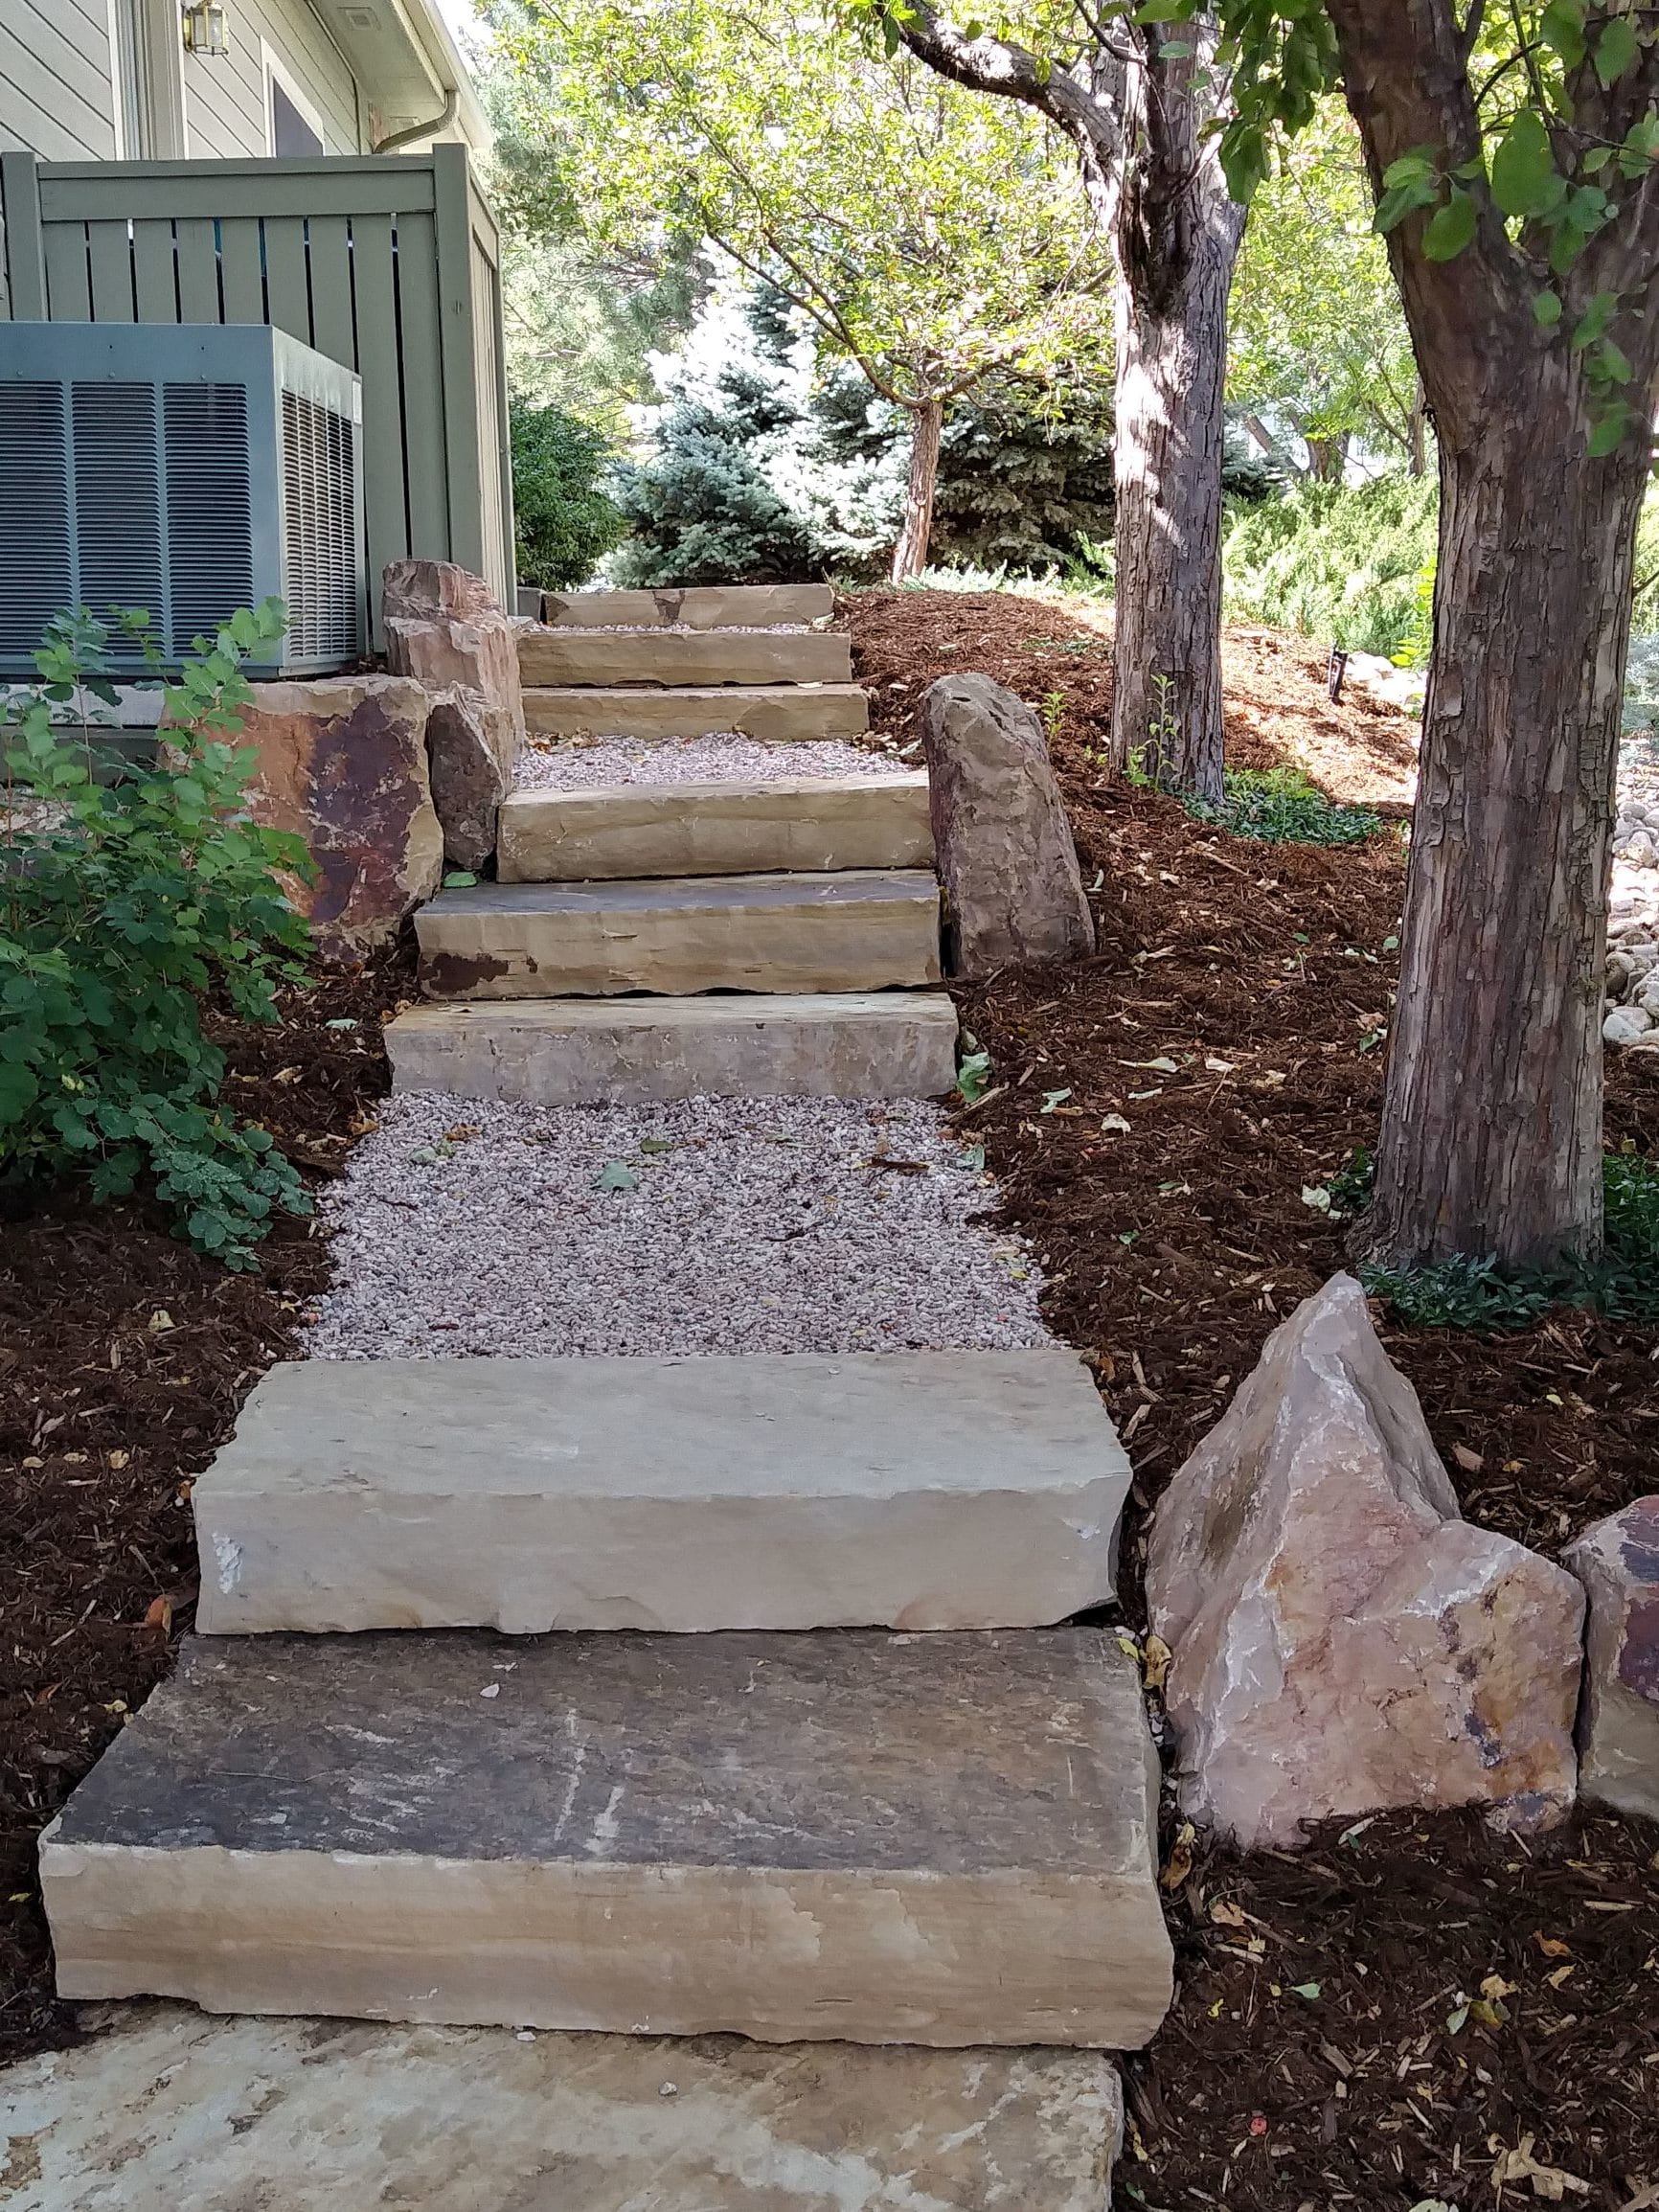 Gravel path with stone steps bordered with large decorative rock.